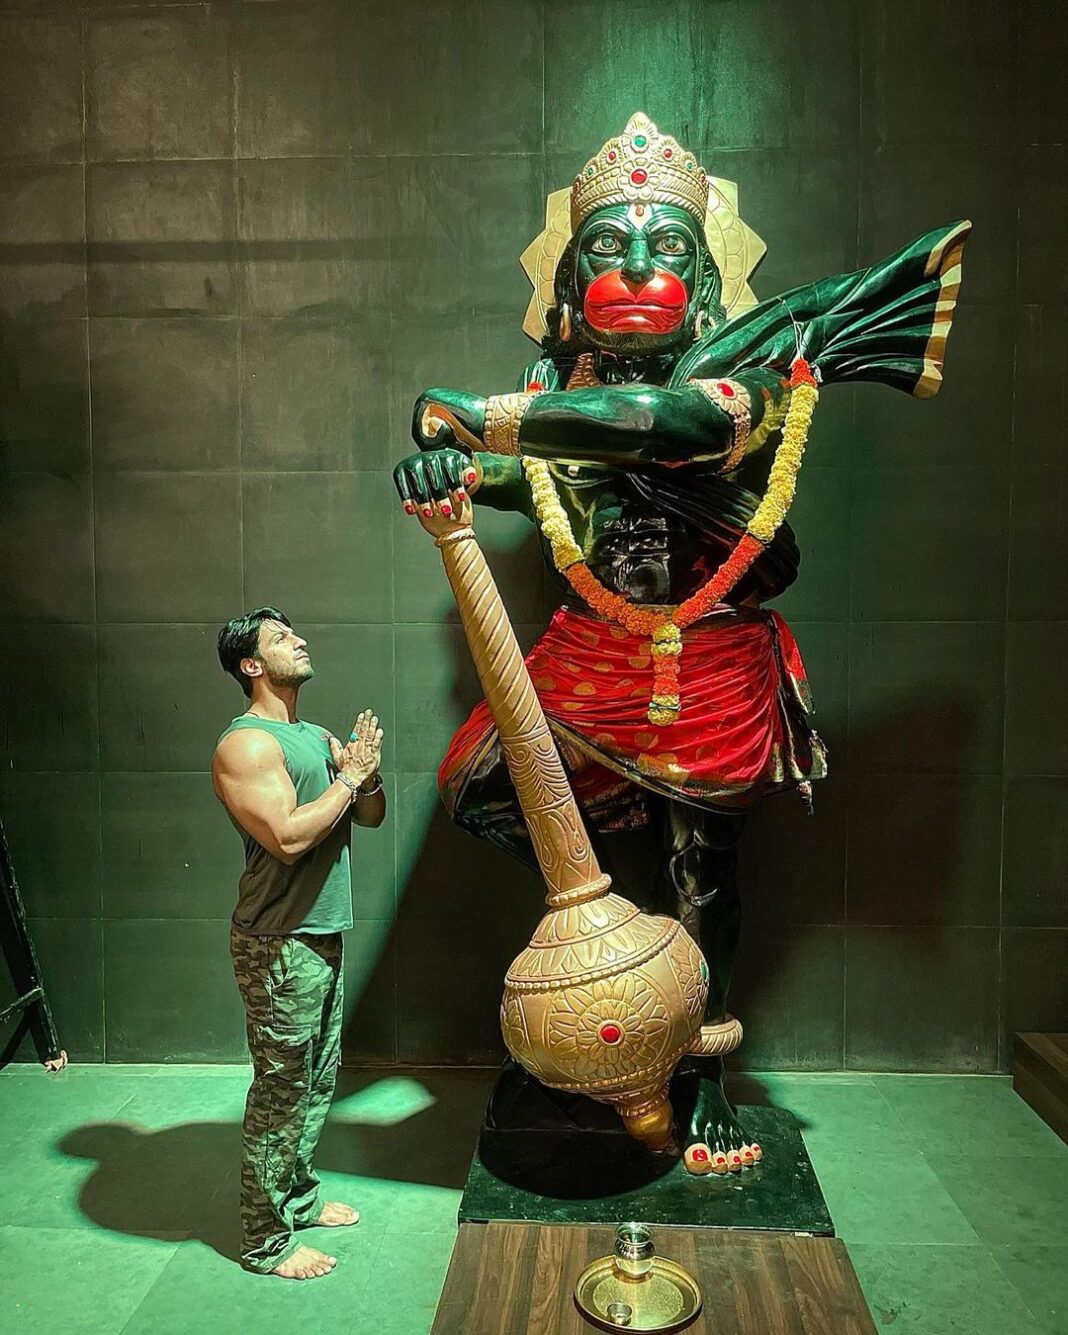 Thakur Anoop Singh Instagram - In life or in size No matter how big you become, lord hanuman is a reminding force that there’s always someone bigger than you!